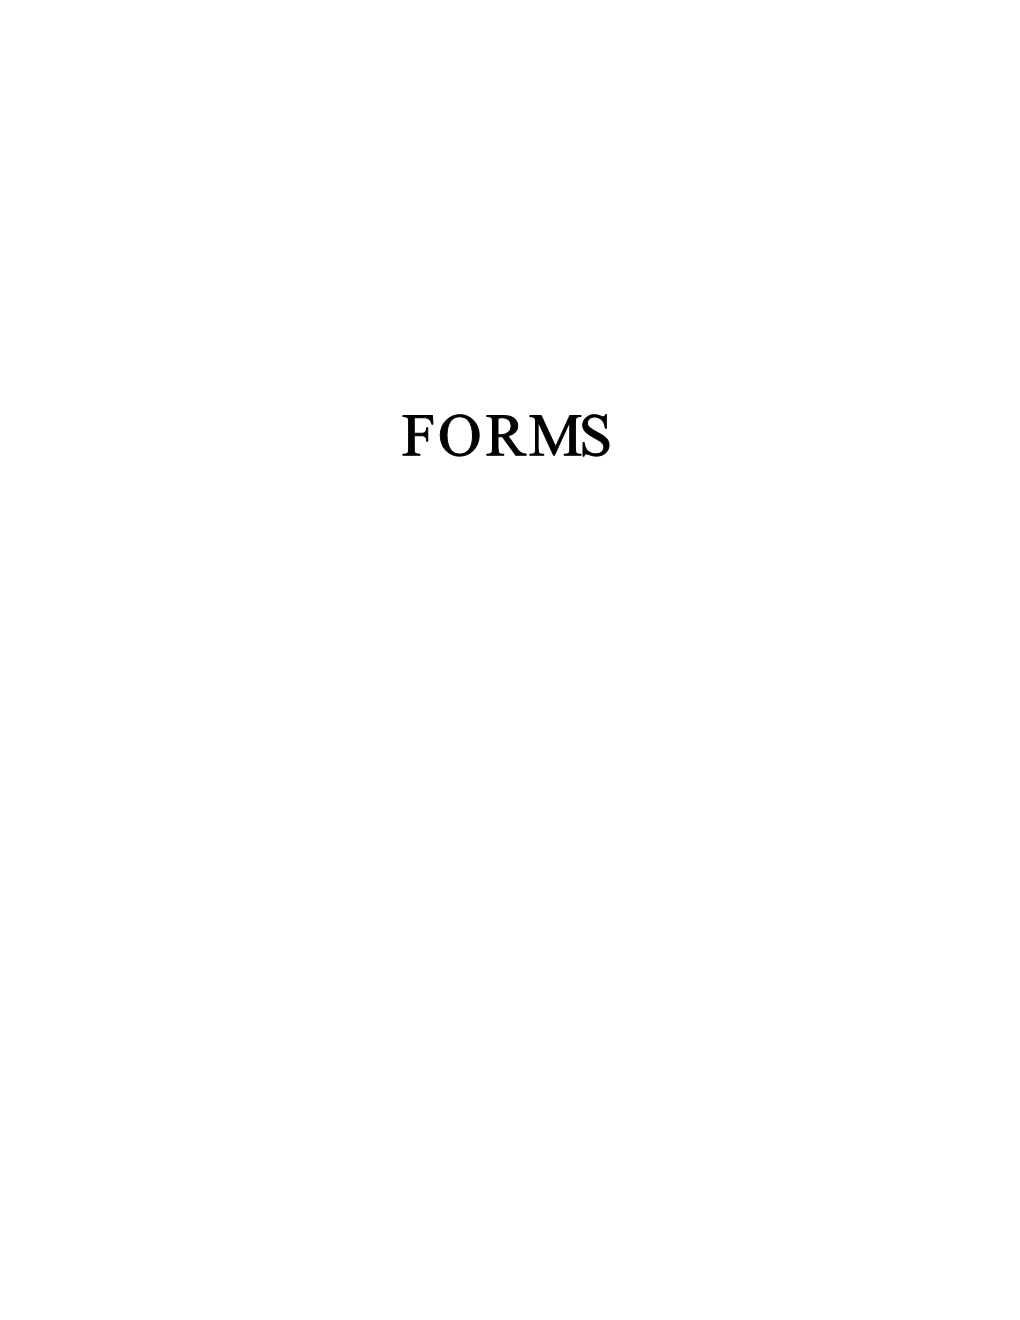 Forms Forms Index